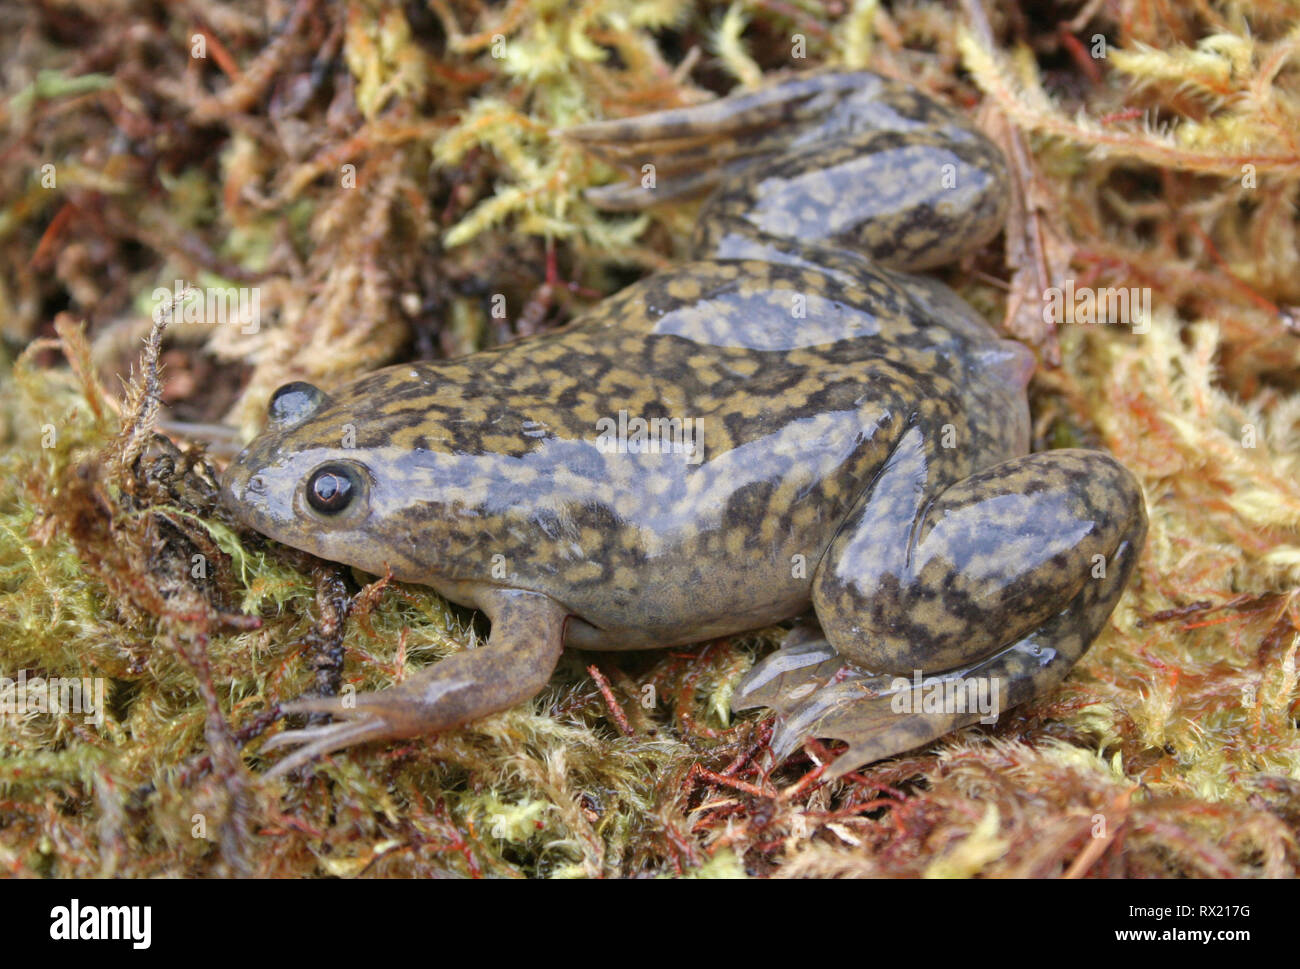 African Clawed-Frog (Xenopus laevis) Stock Photo